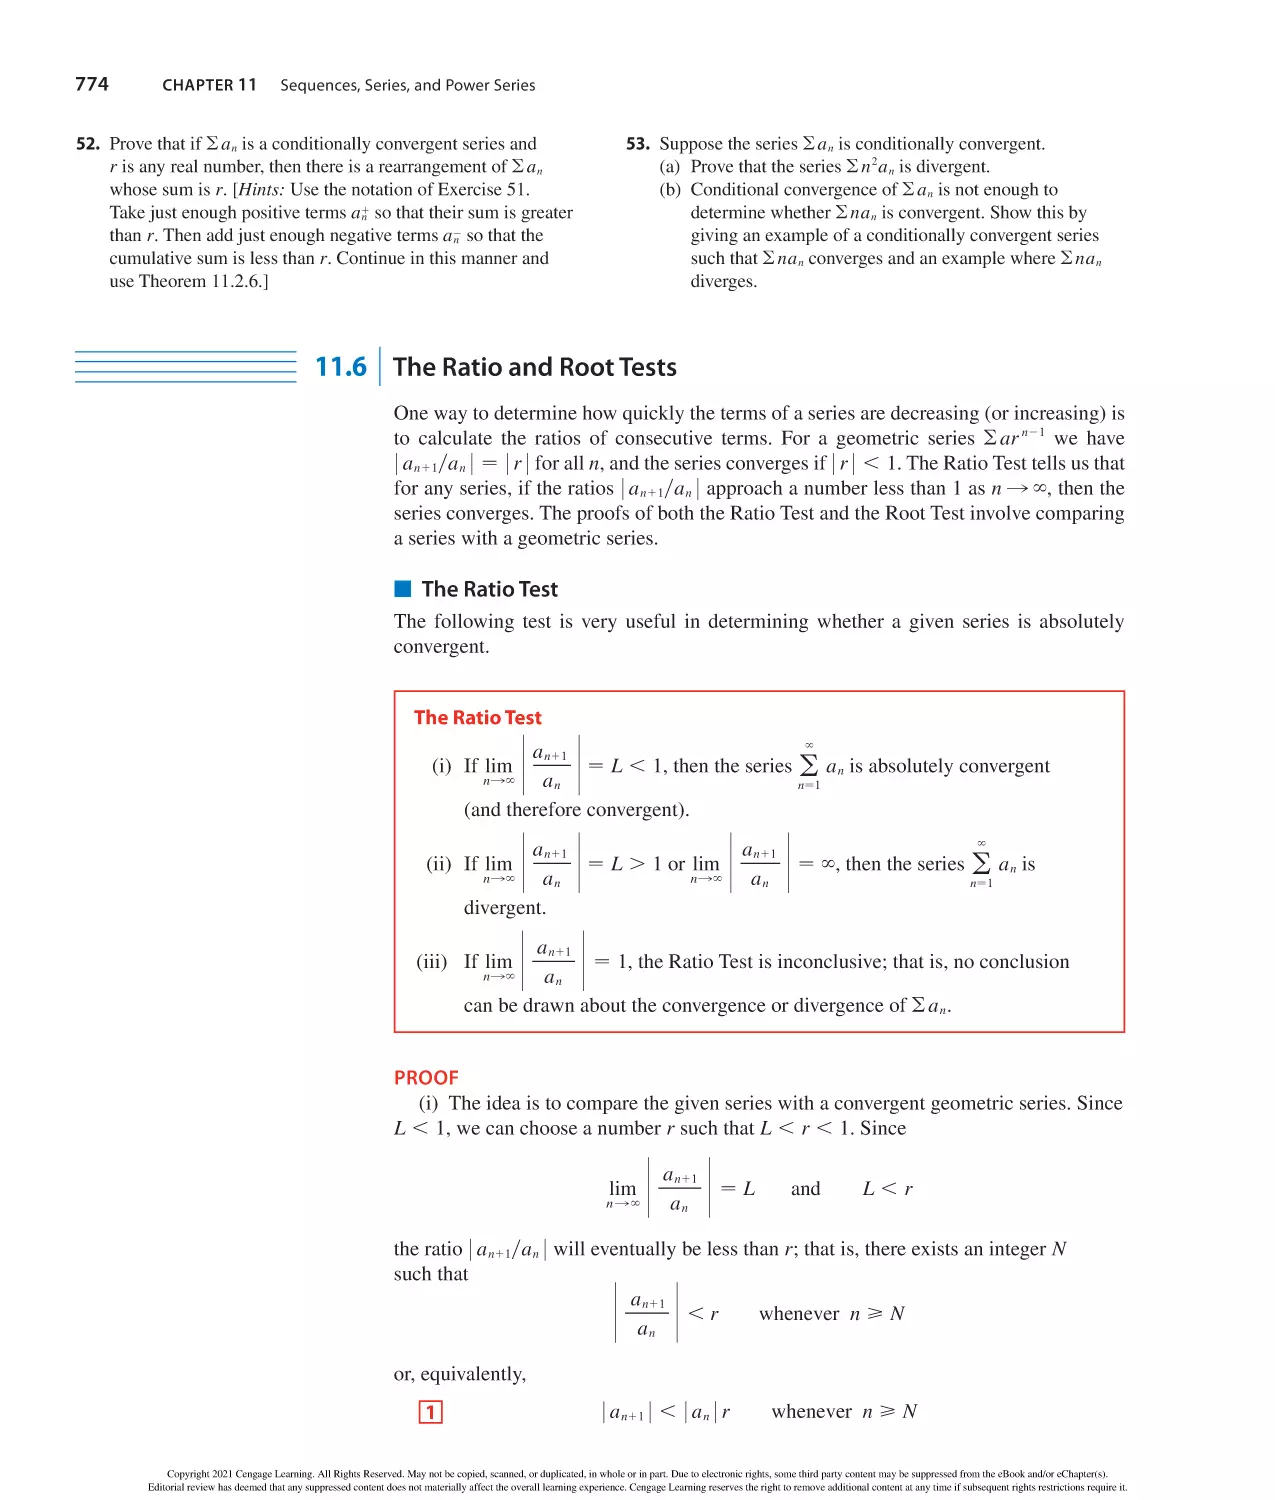 11.6 The Ratio and Root Tests